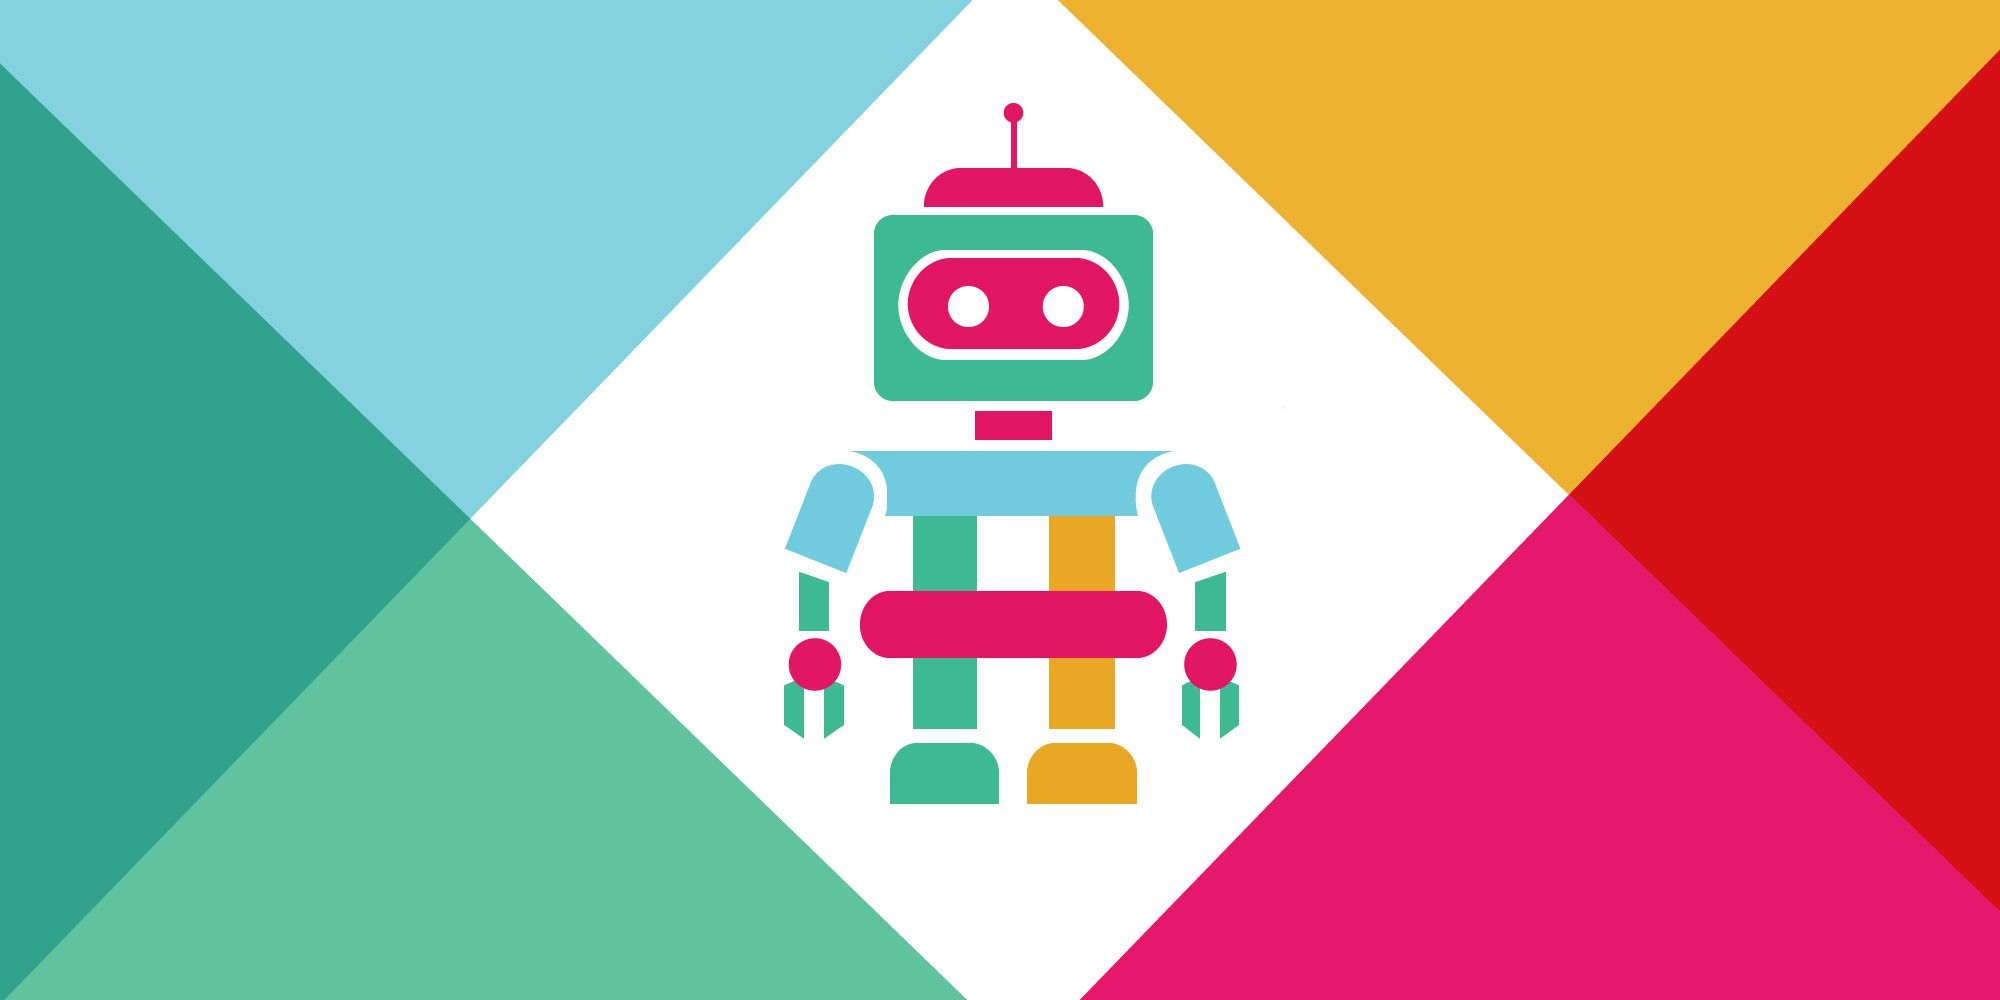 Building a Slackbot with IBM Watson, Part 2